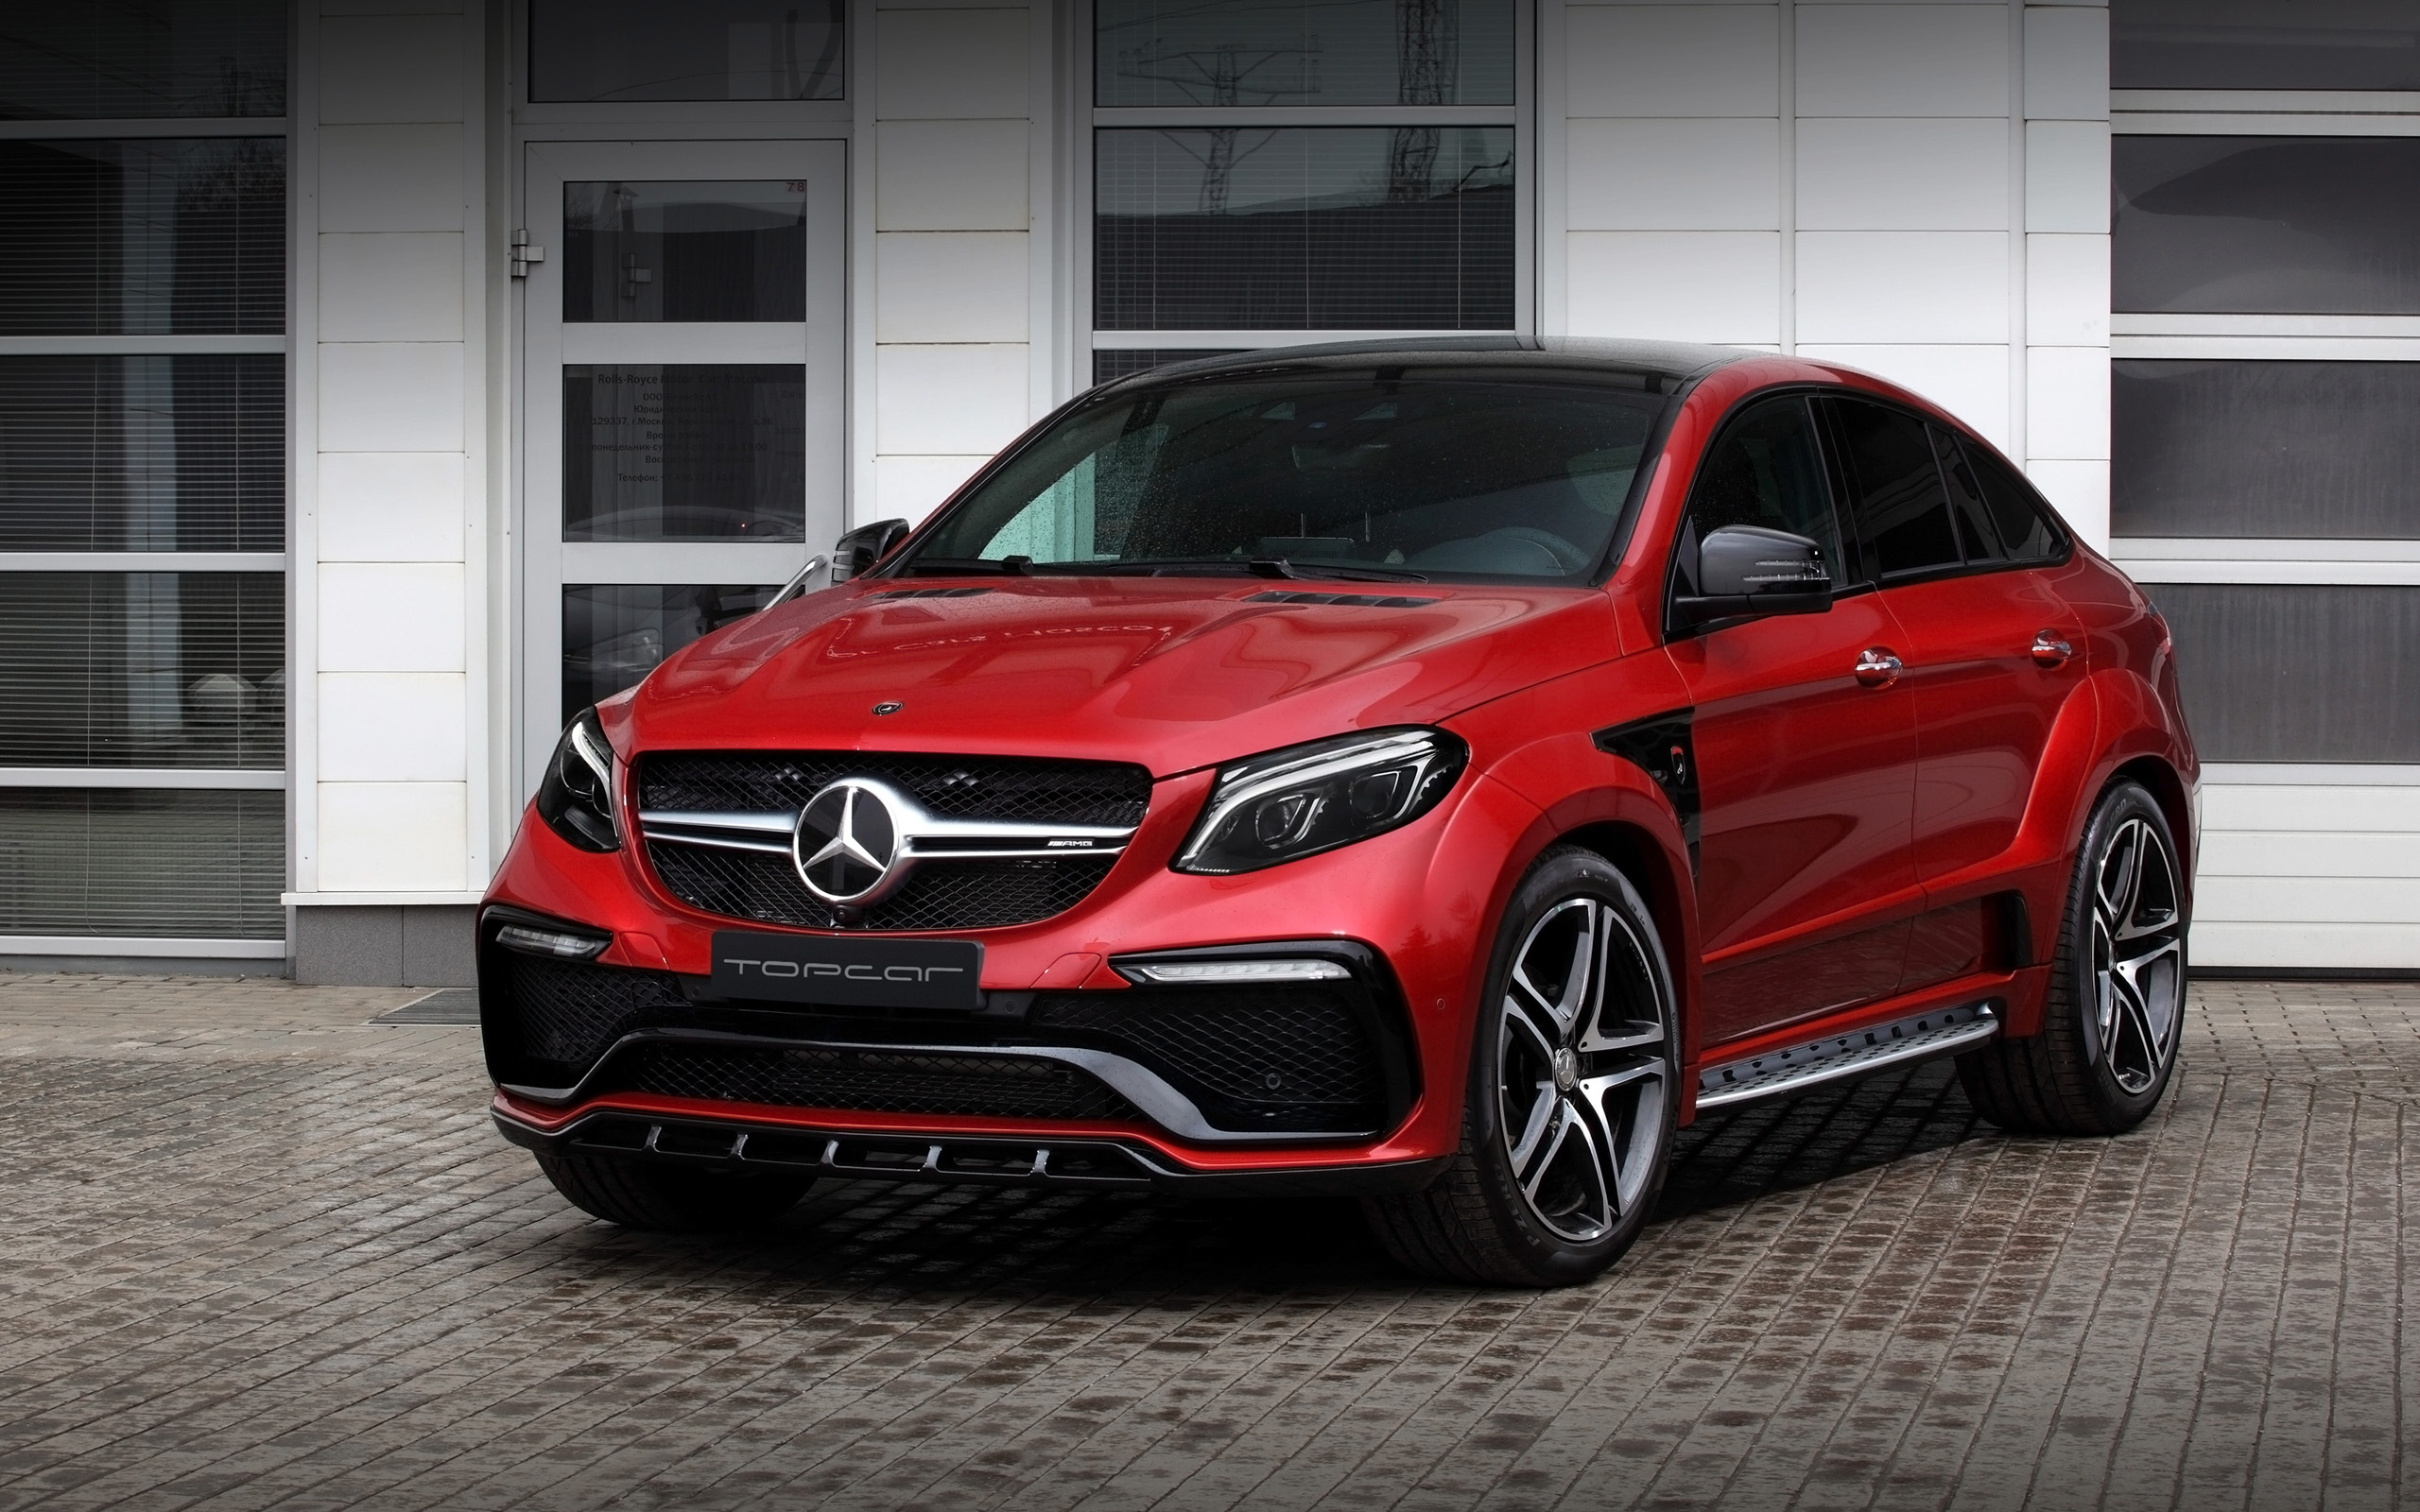 2016 TopCar Mercedes Benz GLE Inferno Red Wallpaper | HD Car Wallpapers